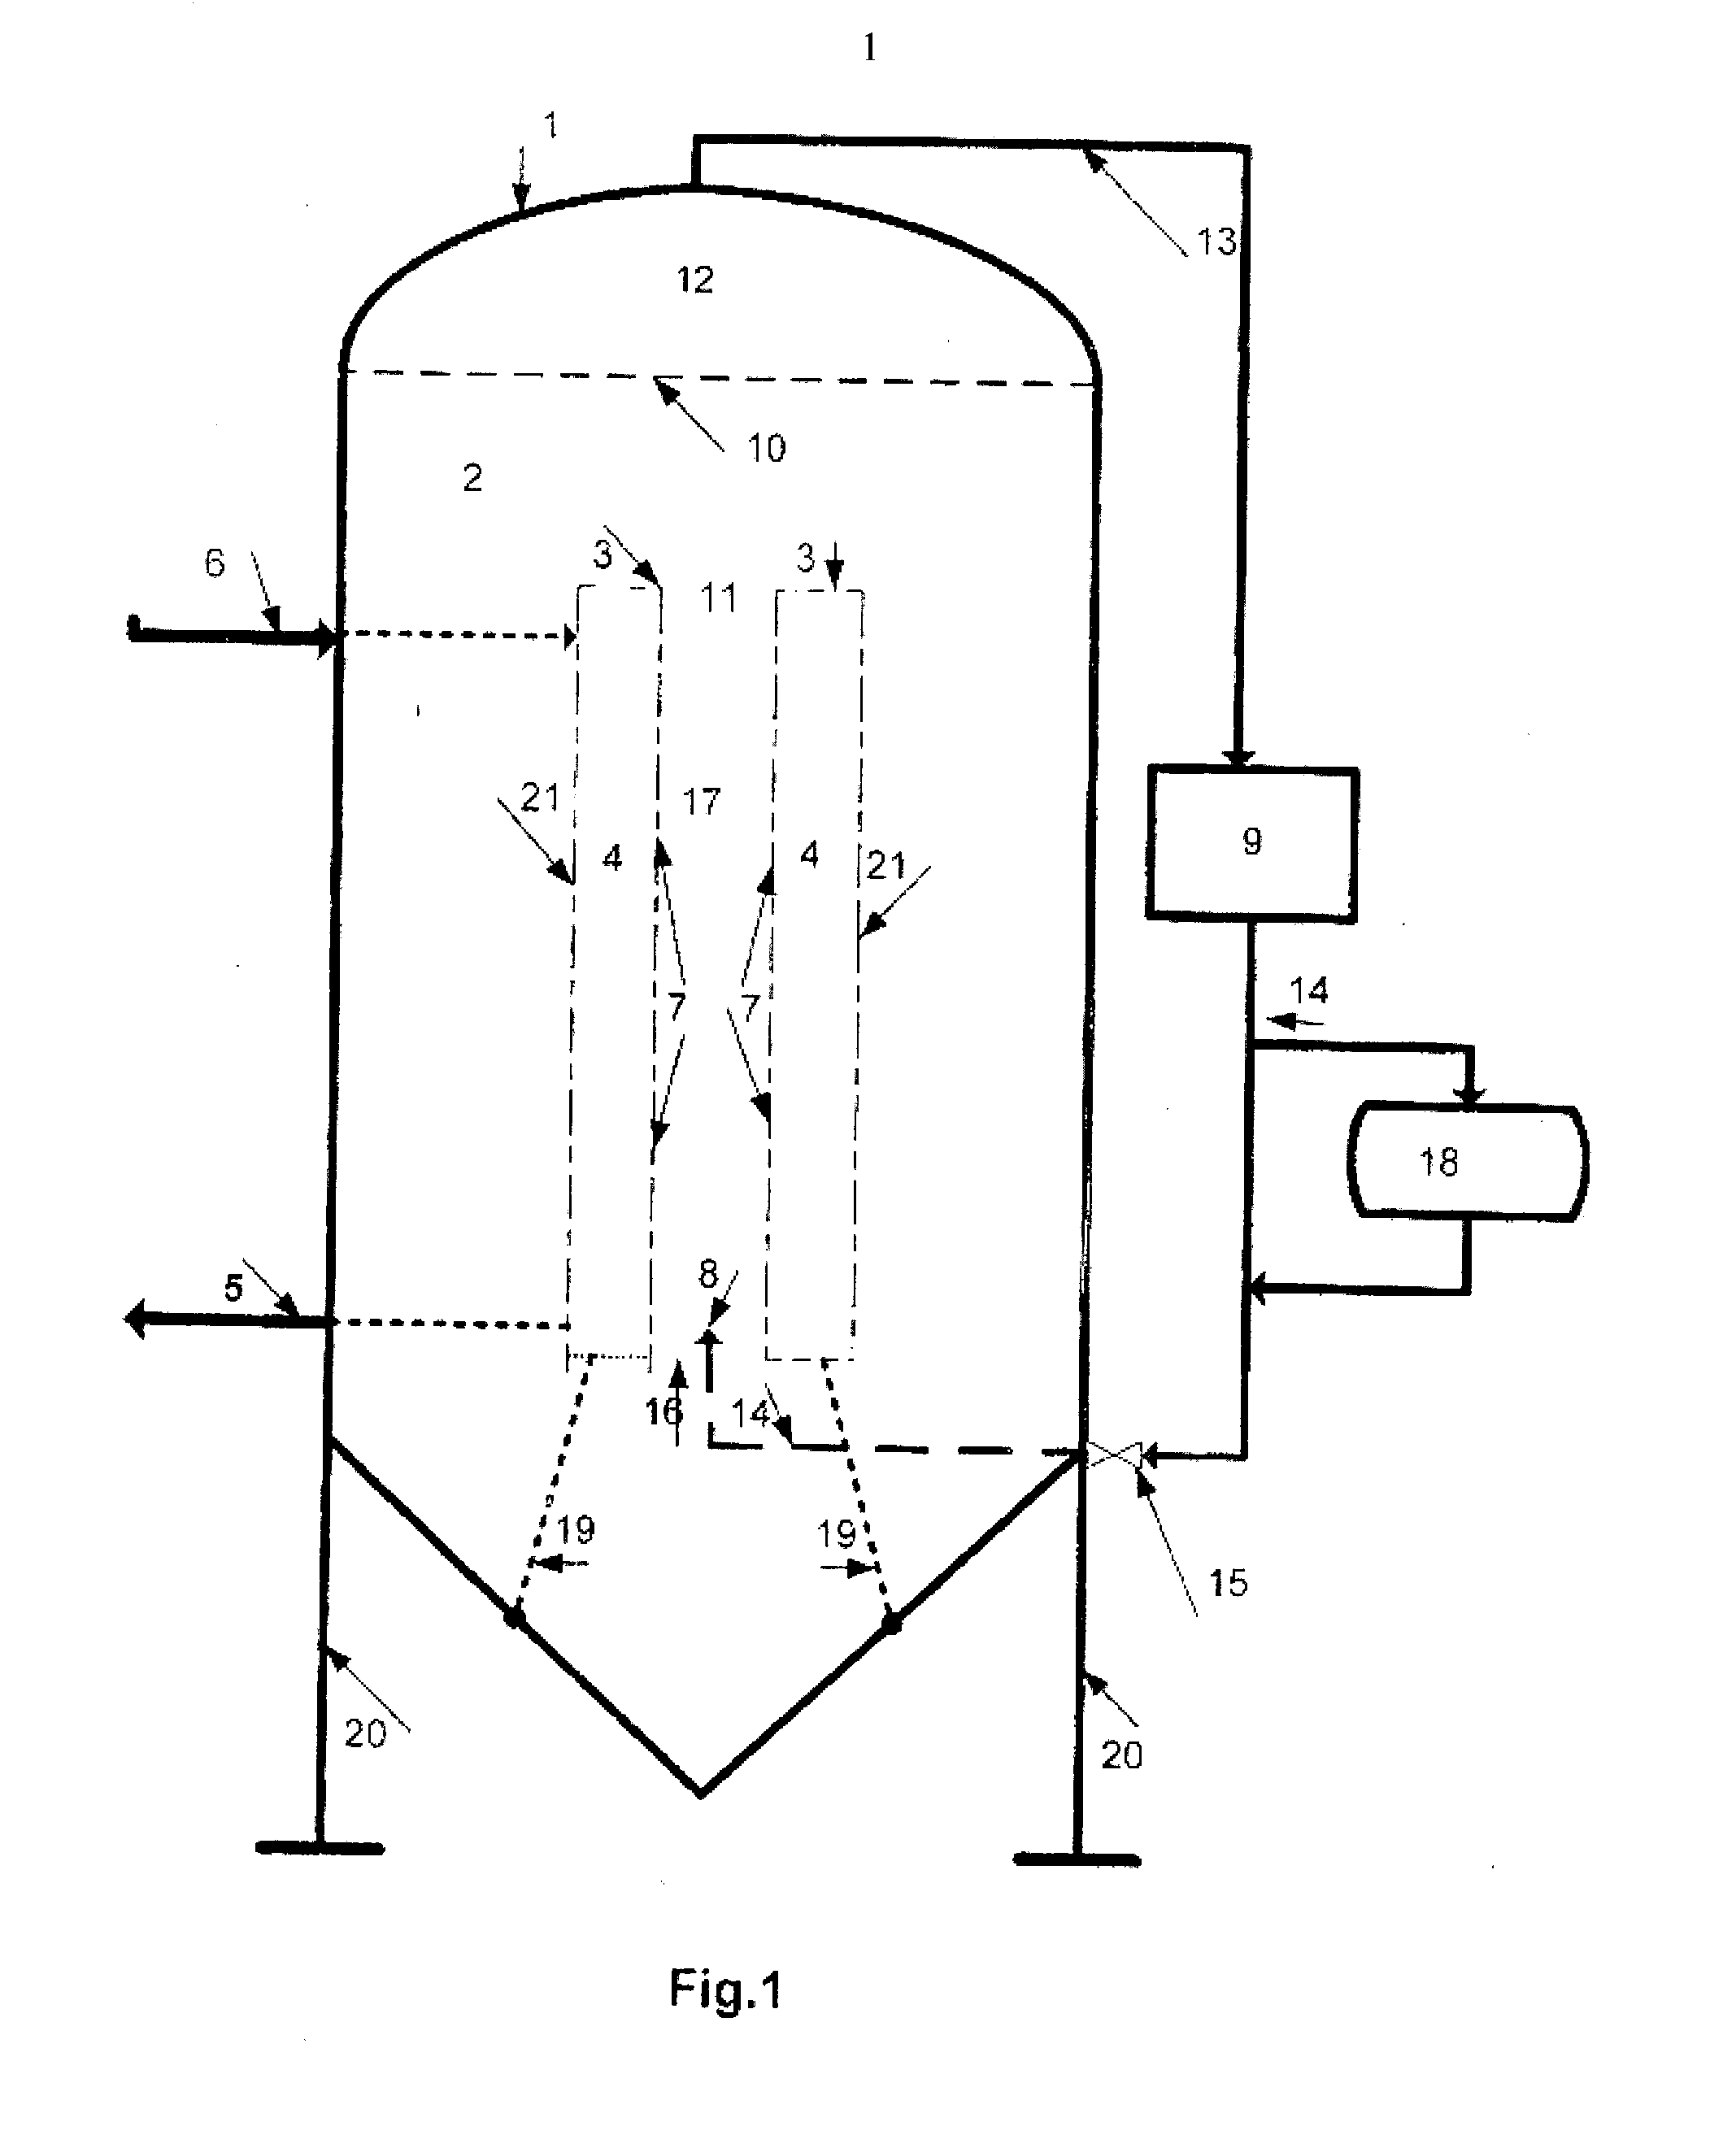 Reduction of the cooling time of the beer in processing tanks by injecting carbon dioxide gas